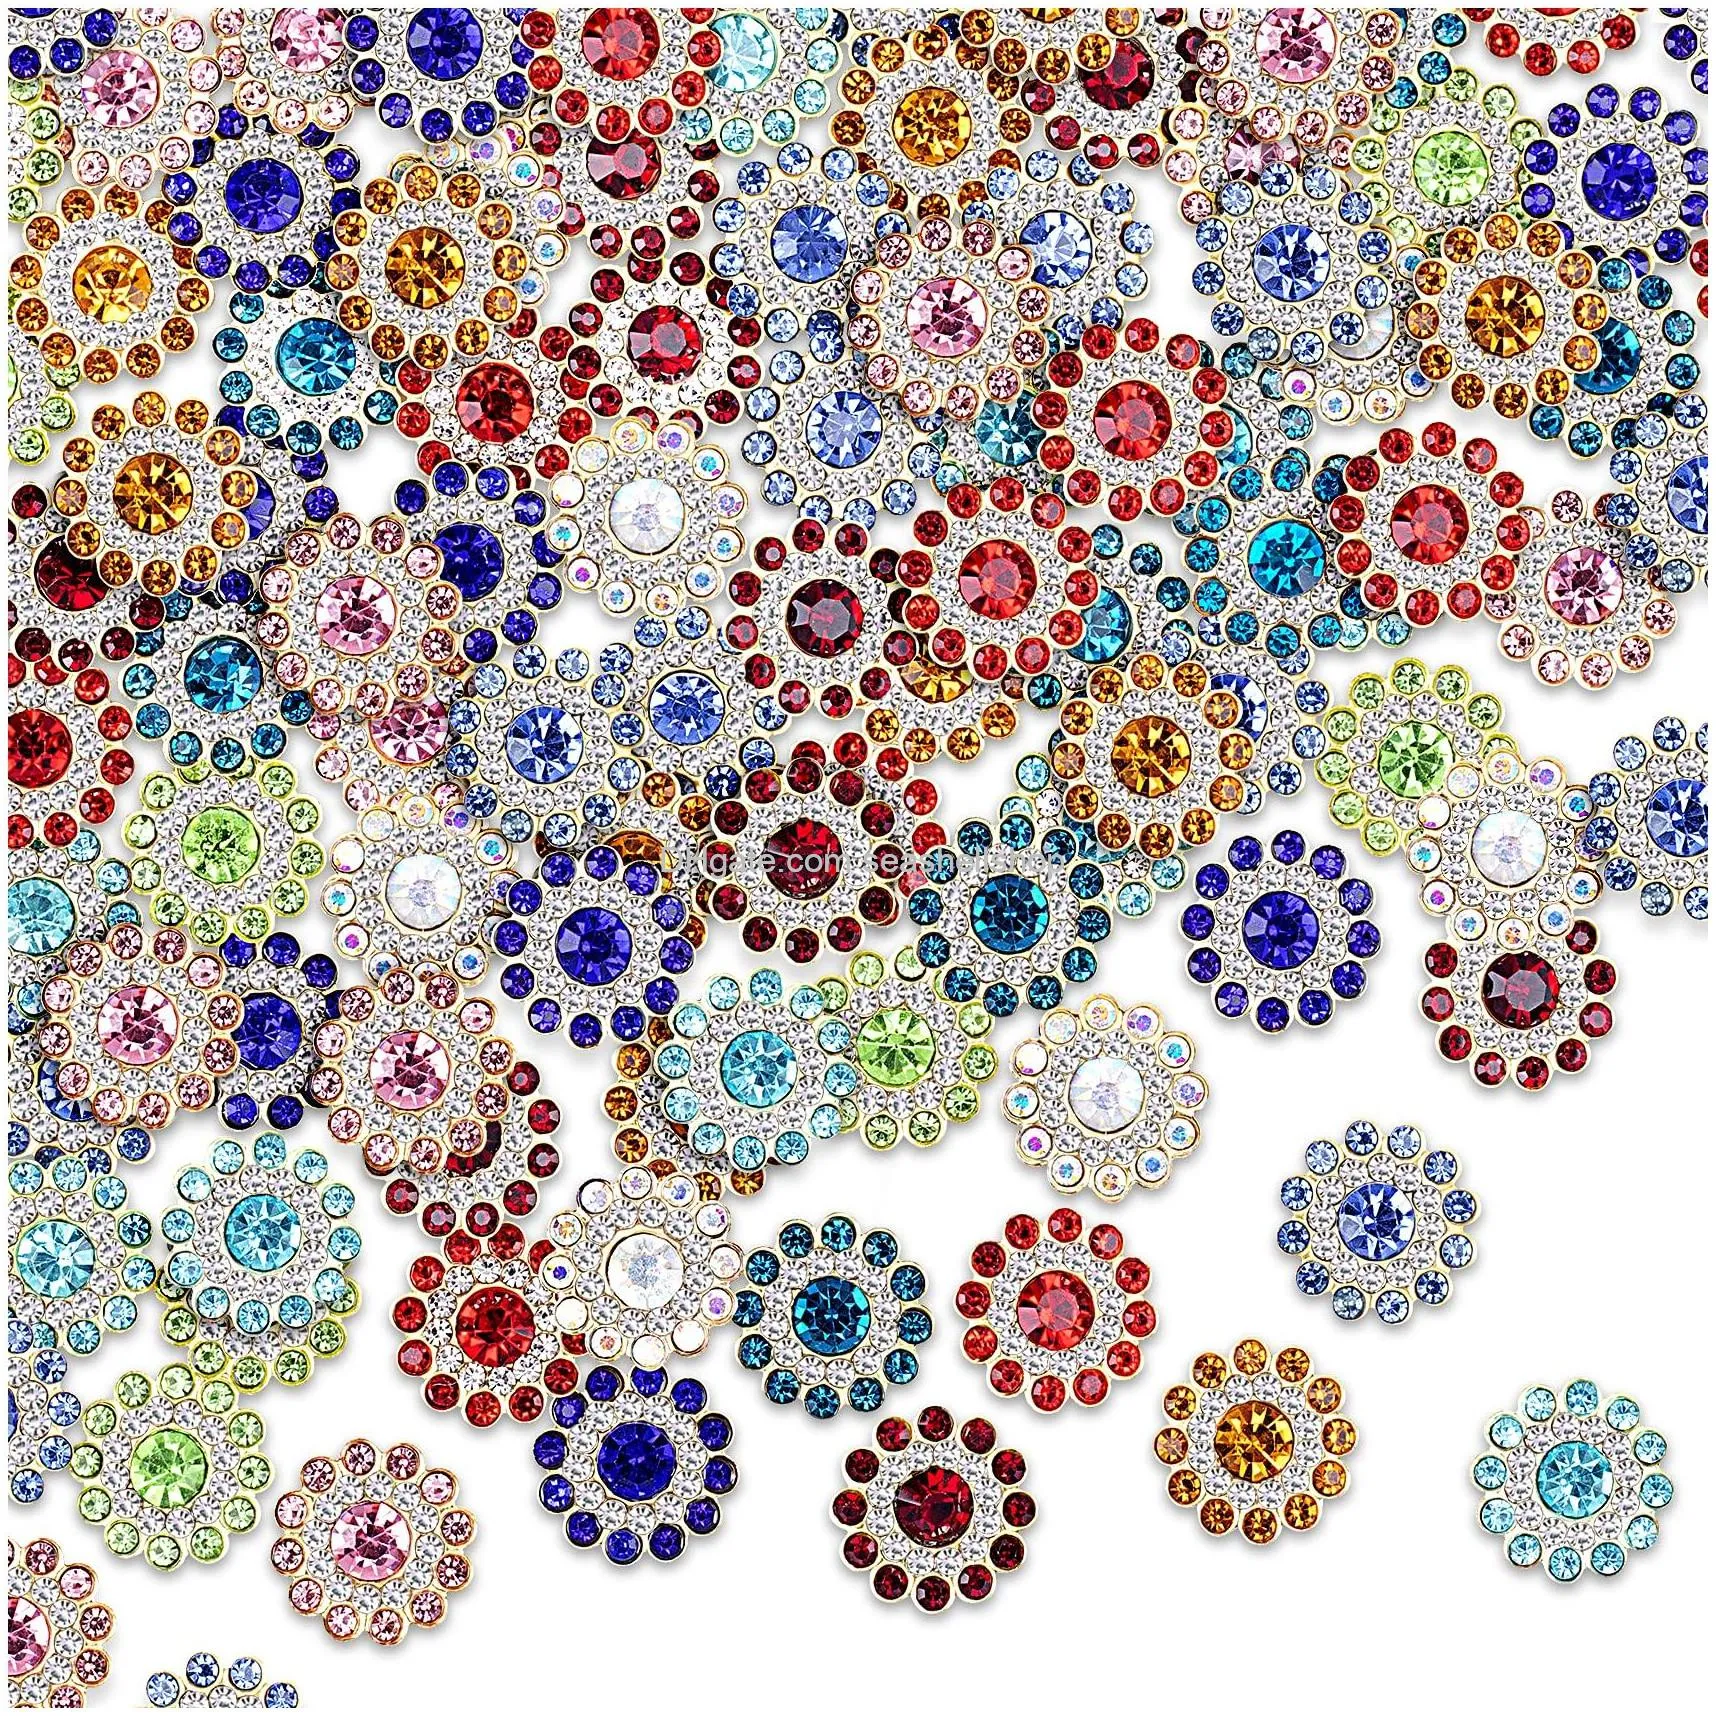 pink pearl rhinestone buttons metal crystal embellishments buttons flat back flower rhinestone buttons for jewelry making clothes bags shoes supplies and wedding diy 0 87/ 22 mm